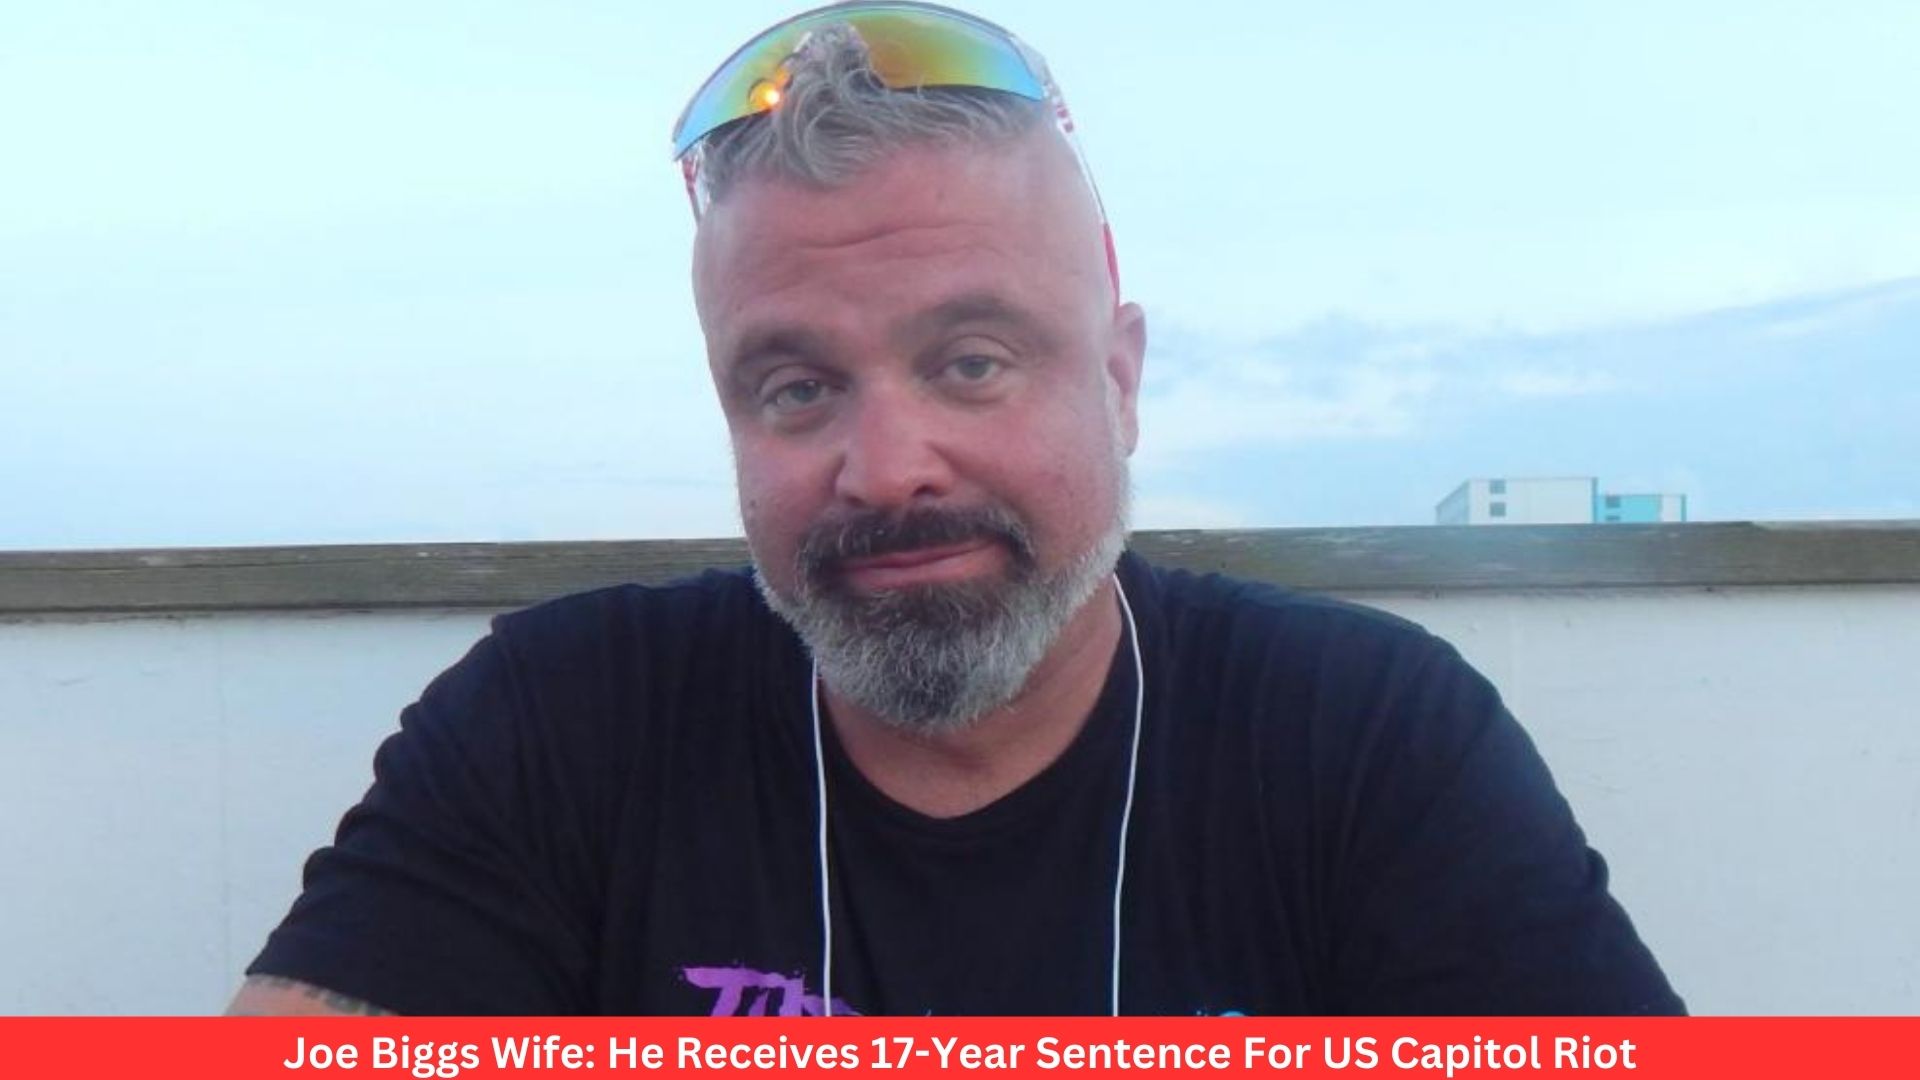 Joe Biggs Wife: He Receives 17-Year Sentence For US Capitol Riot